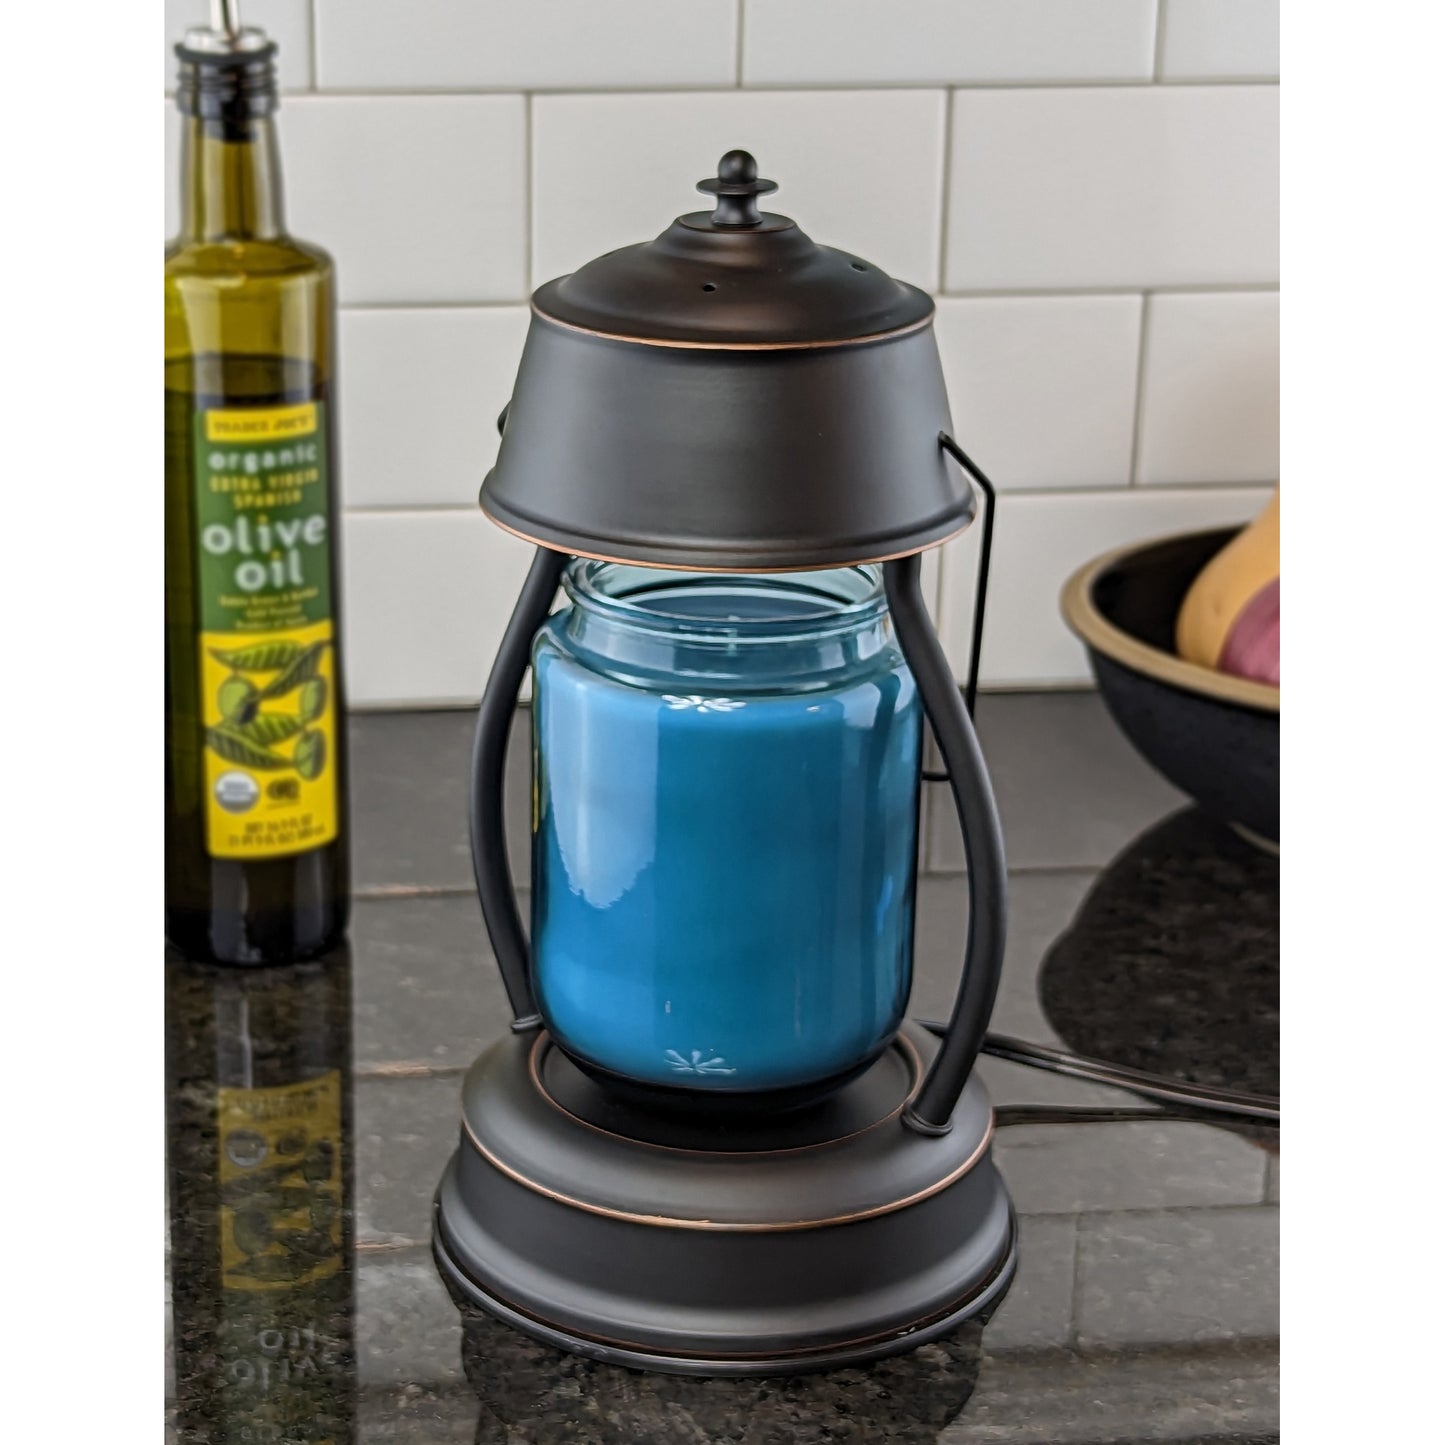 Image, rubbed bronze candle warmer with extra large scented candle on granite countertop in kitchen.